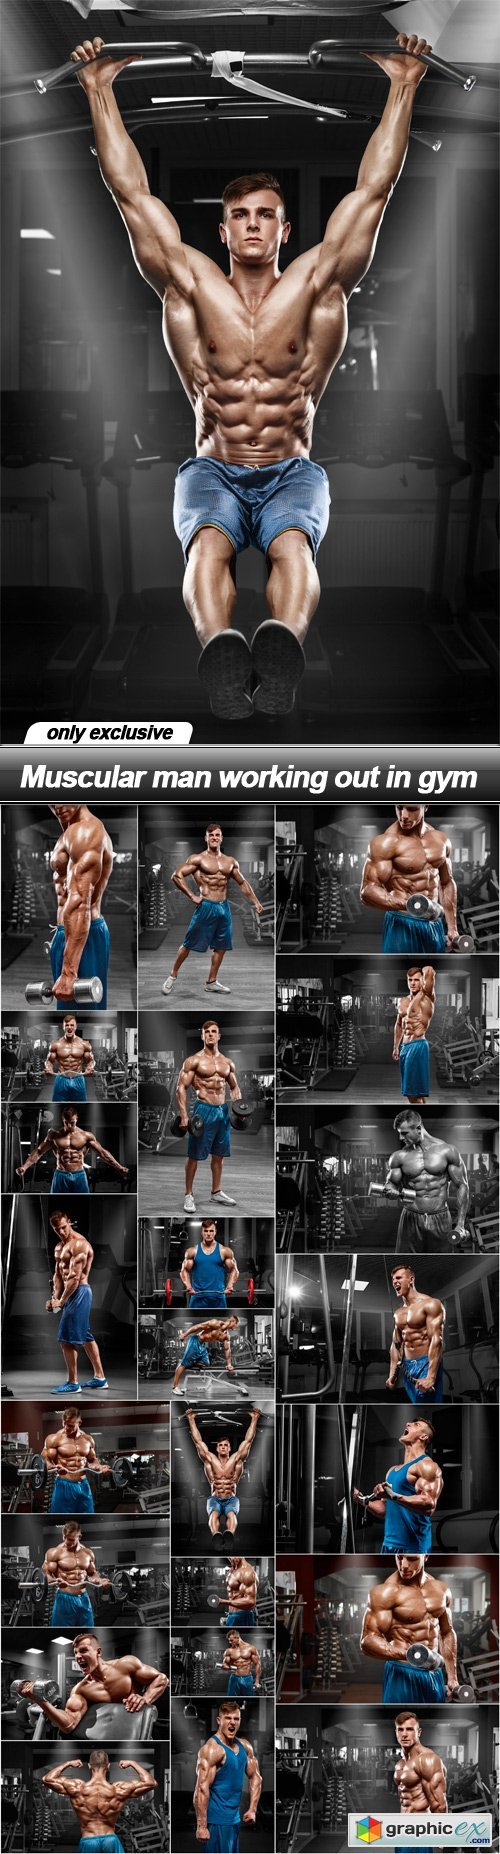 Muscular man working out in gym - 23 UHQ JPEG